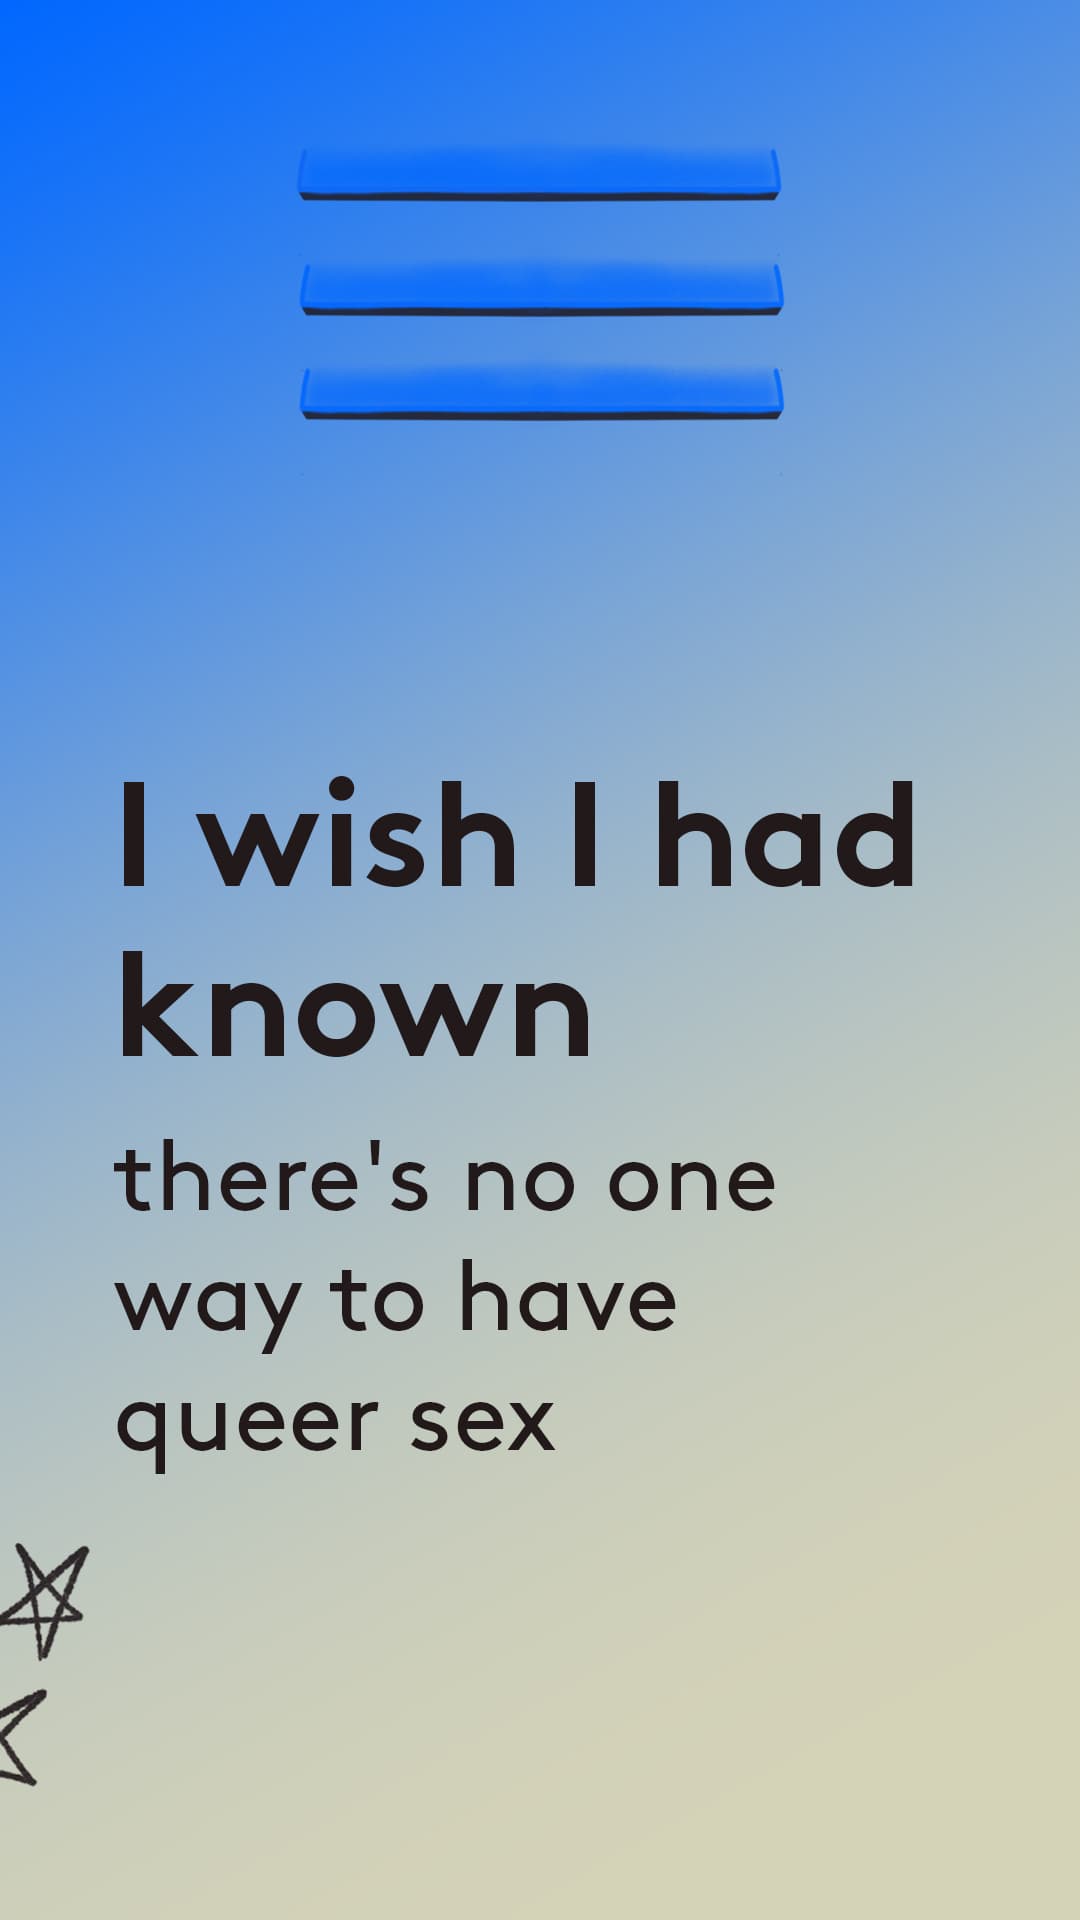 I wish i had known theres no one way to have queer sex